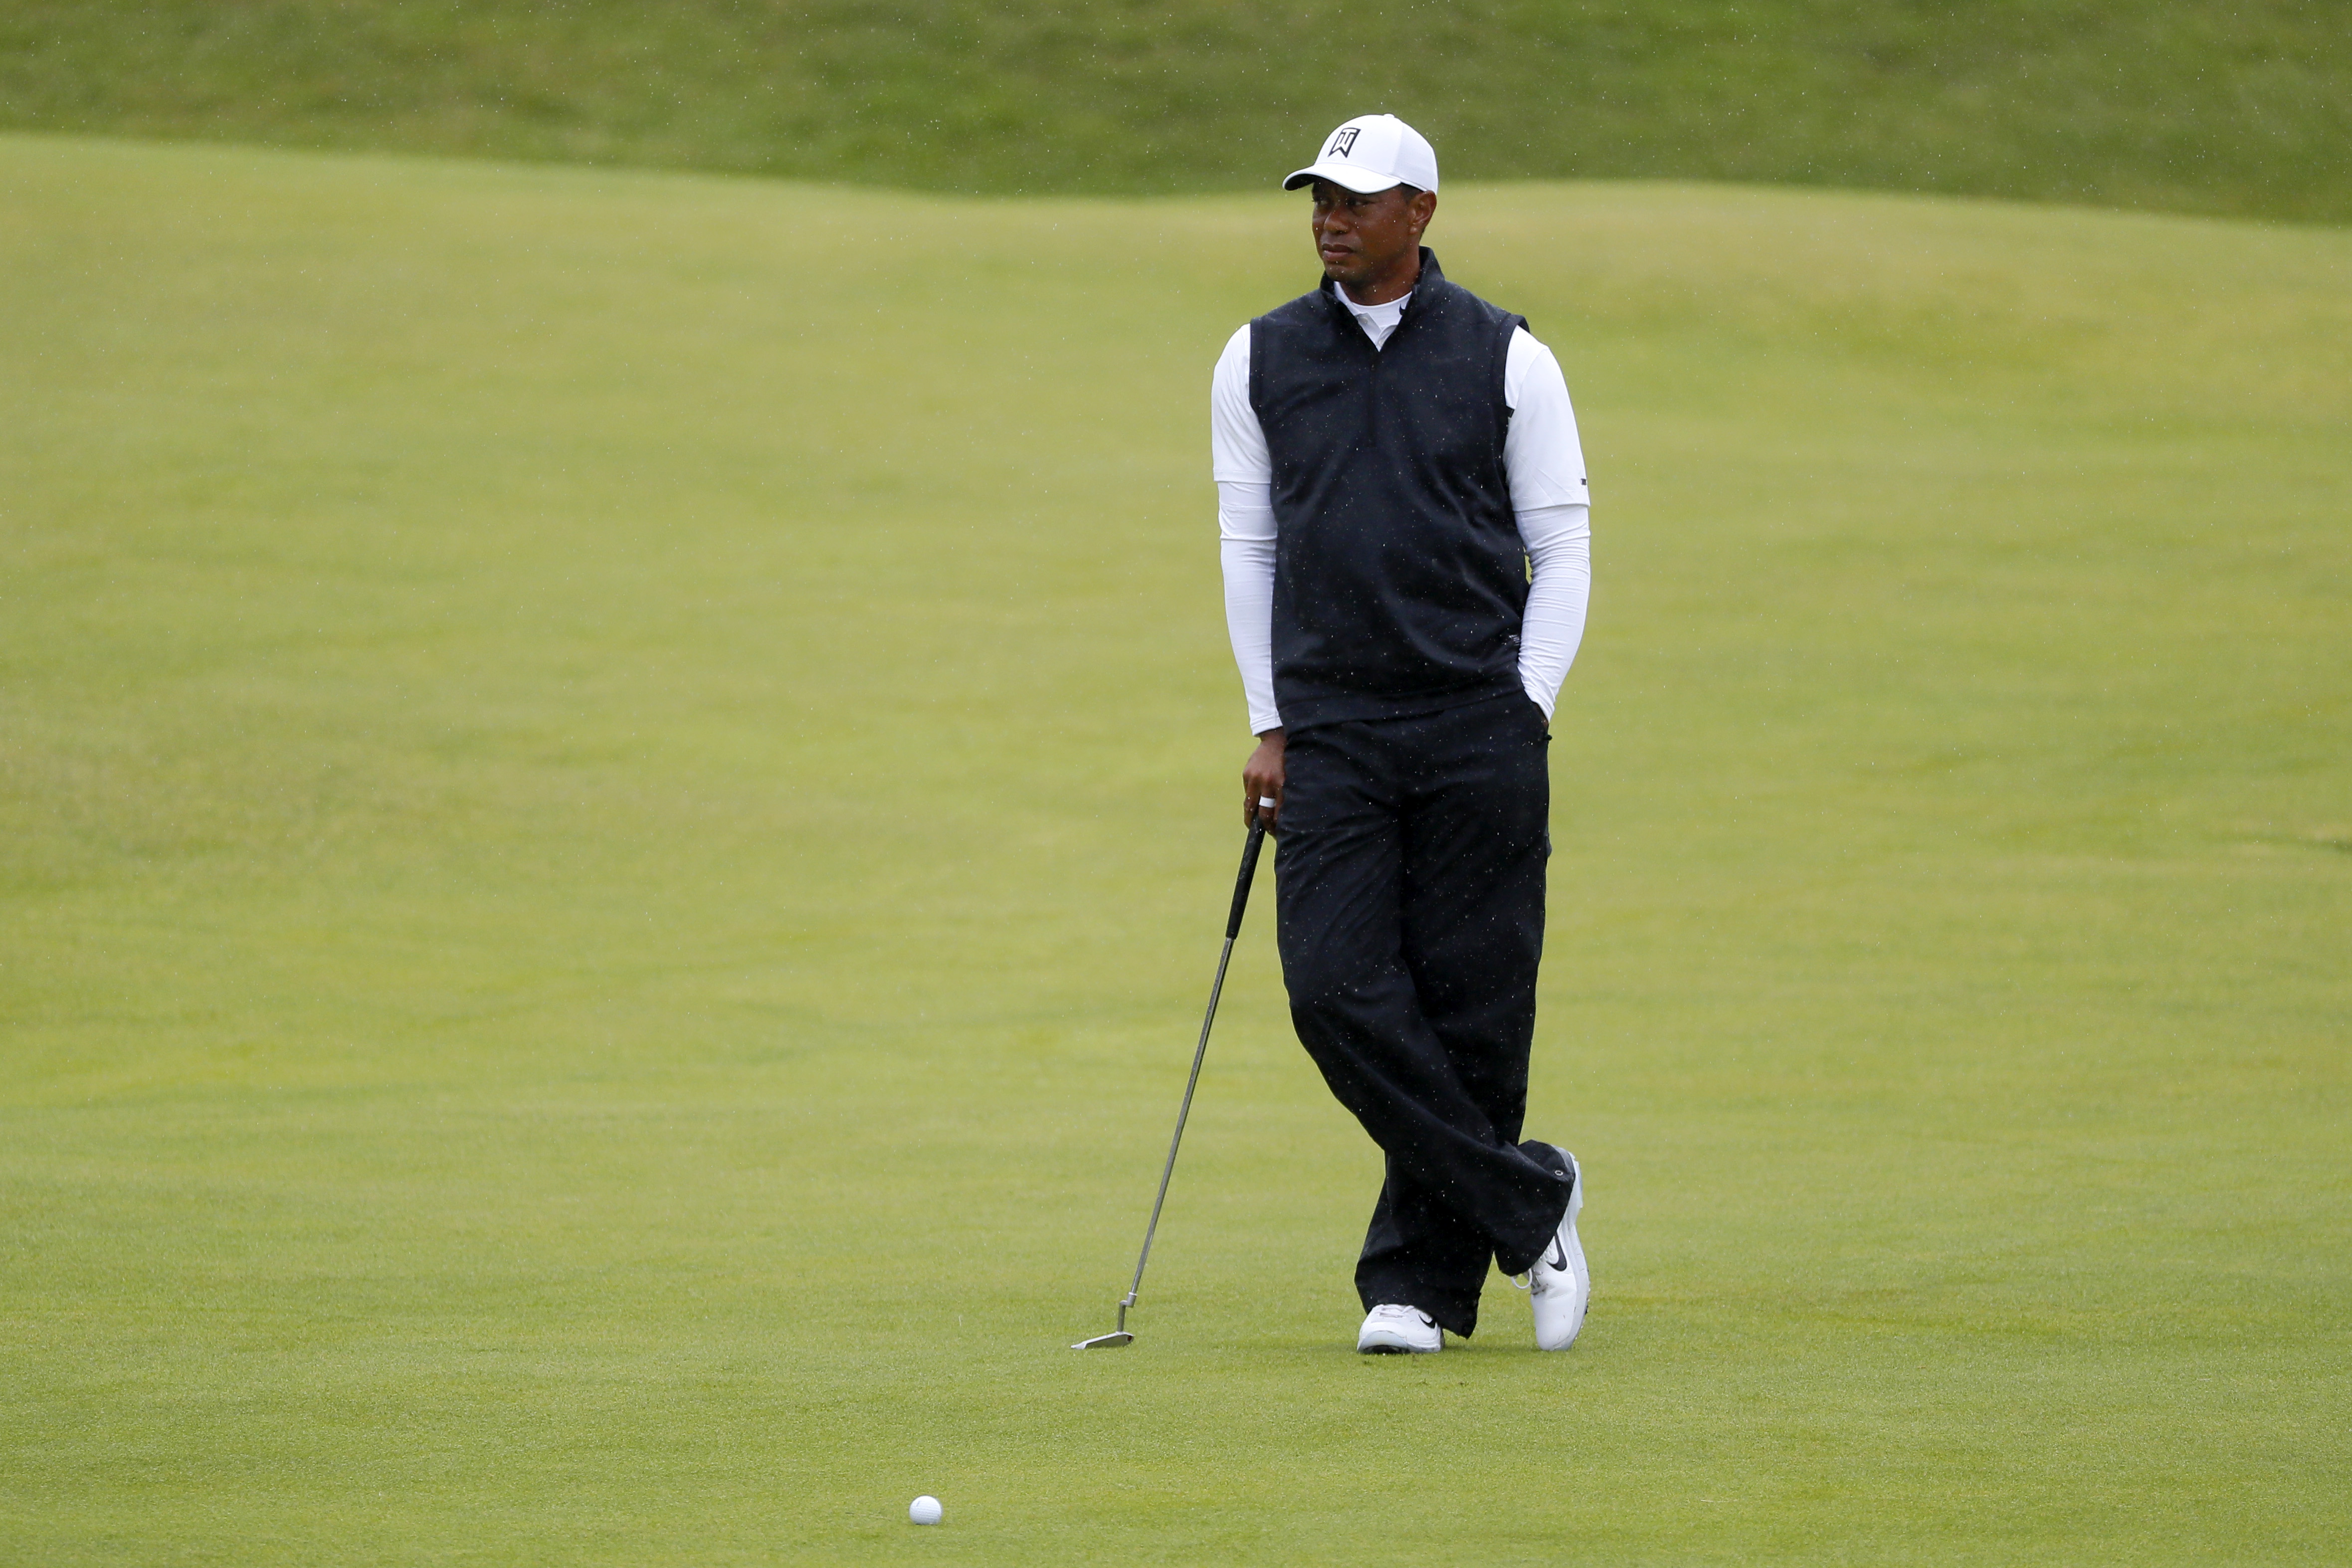 Tiger Woods on the second day at Royal Portrush.